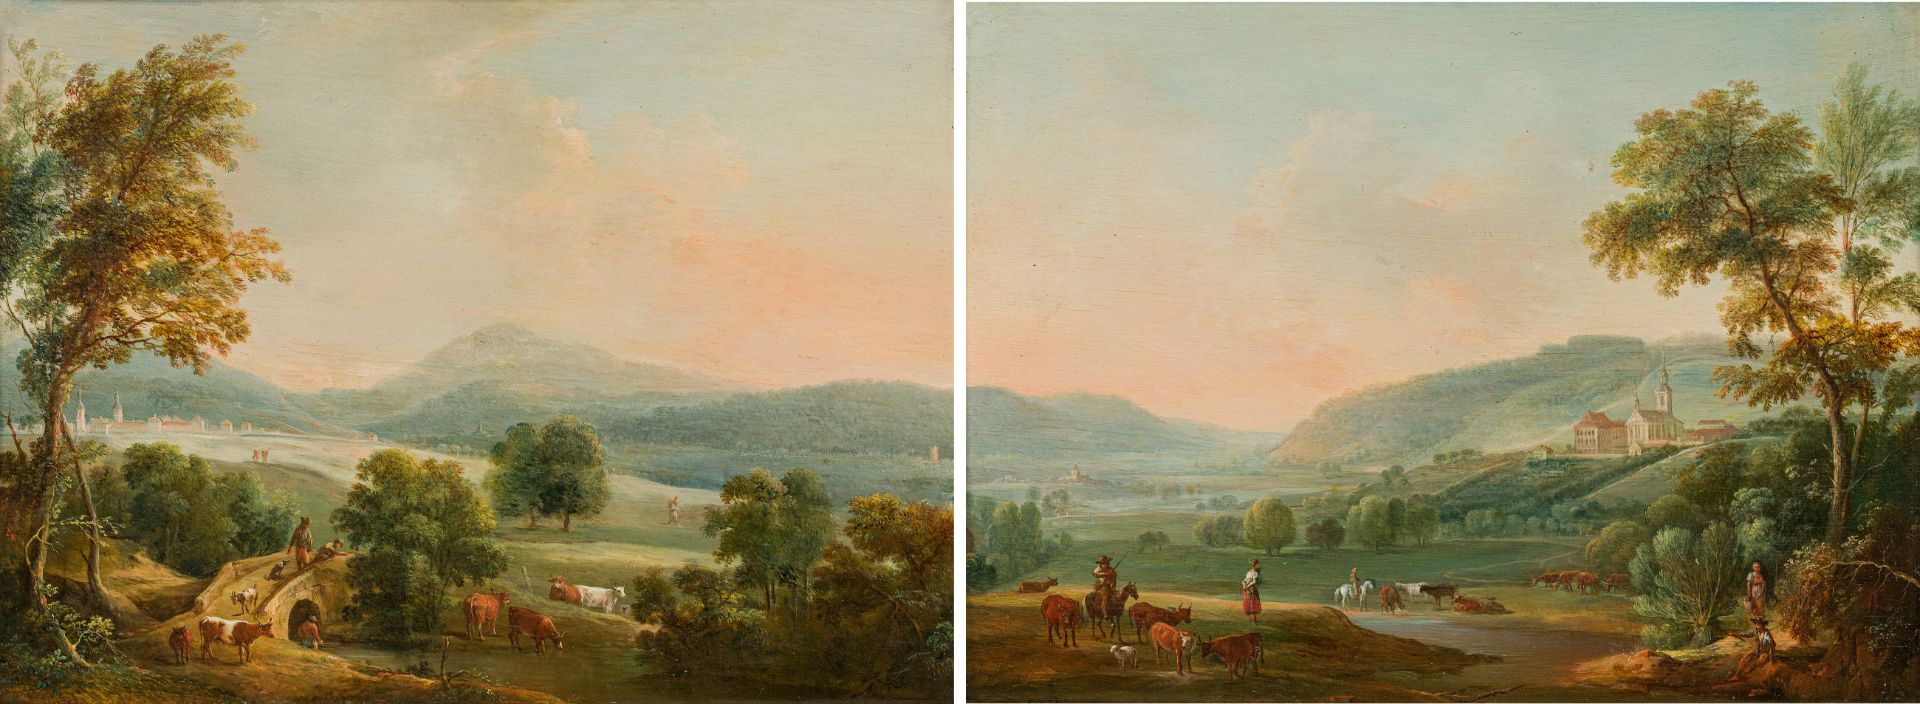 Attributed to Josef Heideloff, Wide landscape with shepherds and flocks (counterparts)